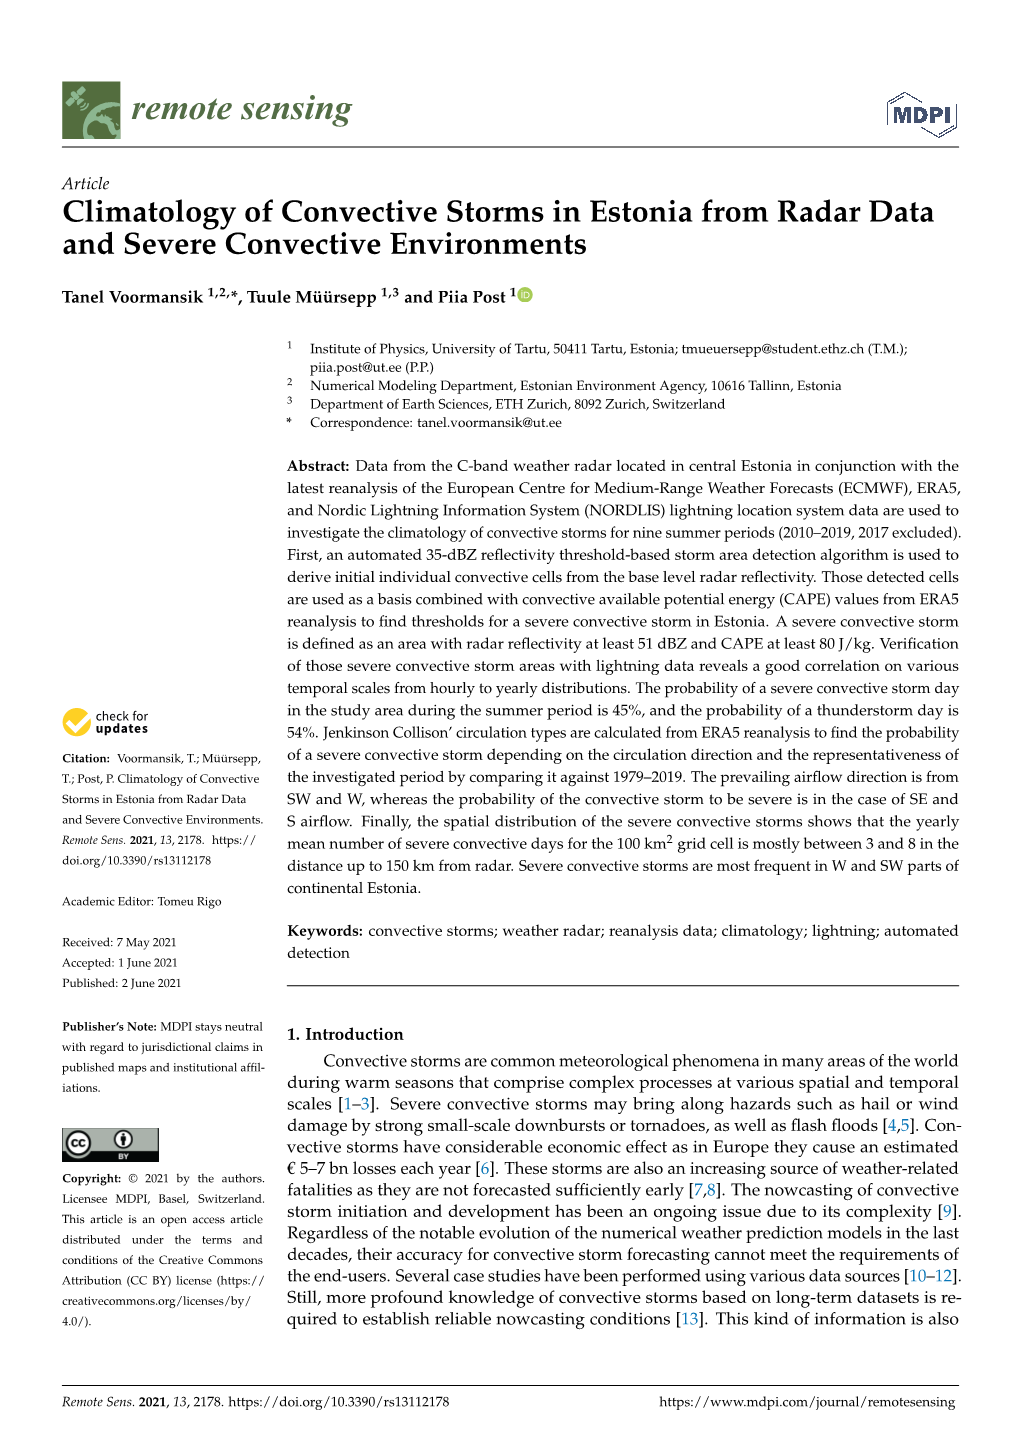 Climatology of Convective Storms in Estonia from Radar Data and Severe Convective Environments